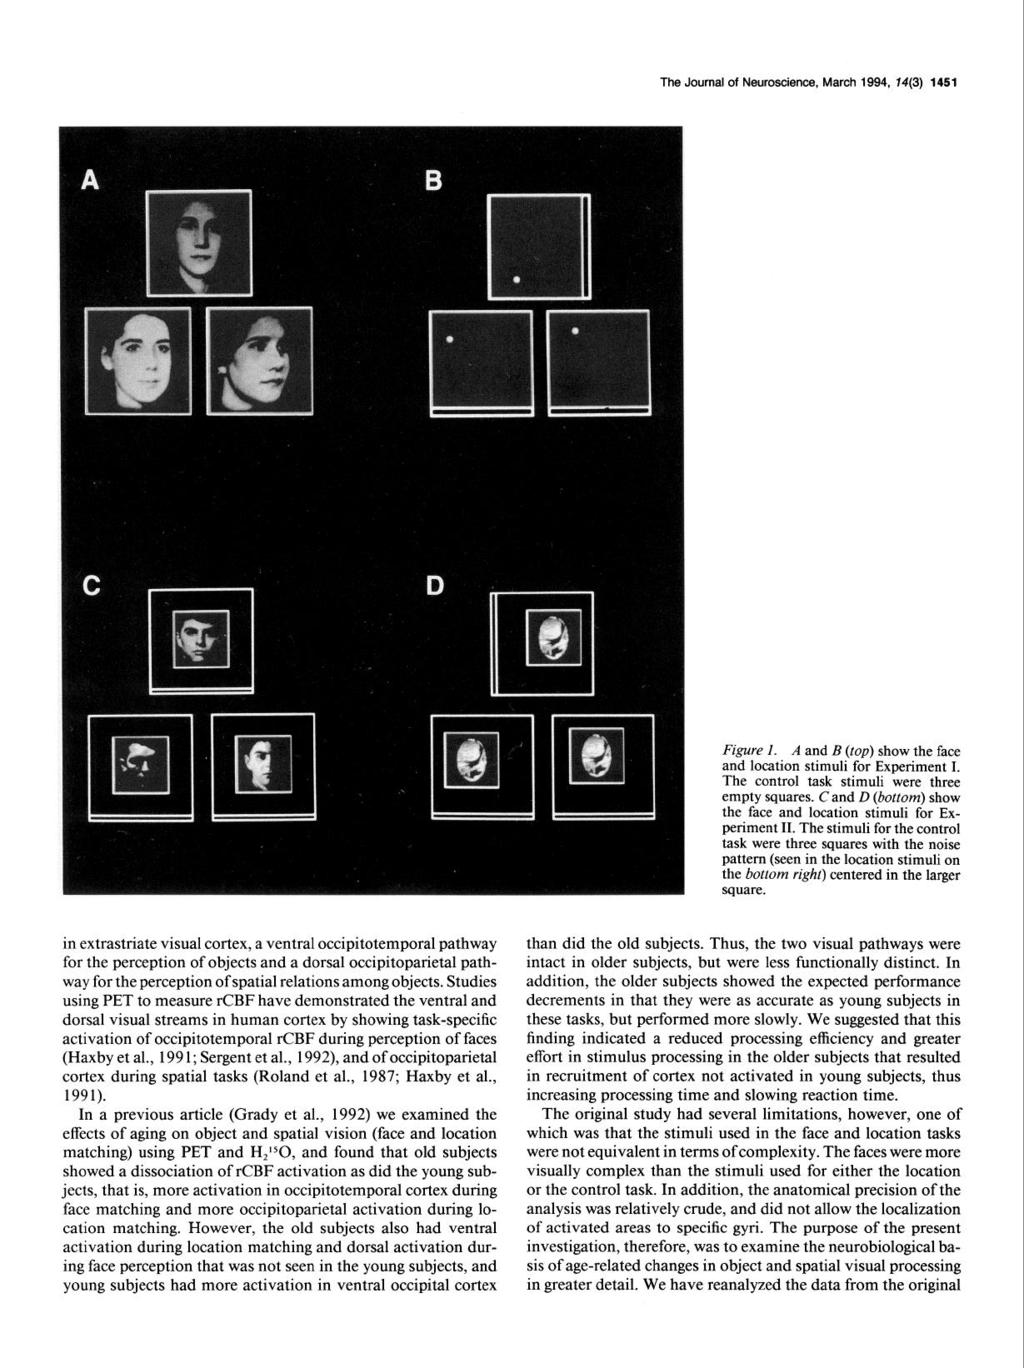 The Journal of Neuroscience, March 1994, 74(3) 1451 in extrastriate visual cortex, a ventral occipitotemporal pathway for the perception of objects and a dorsal occipitoparietal pathway for the